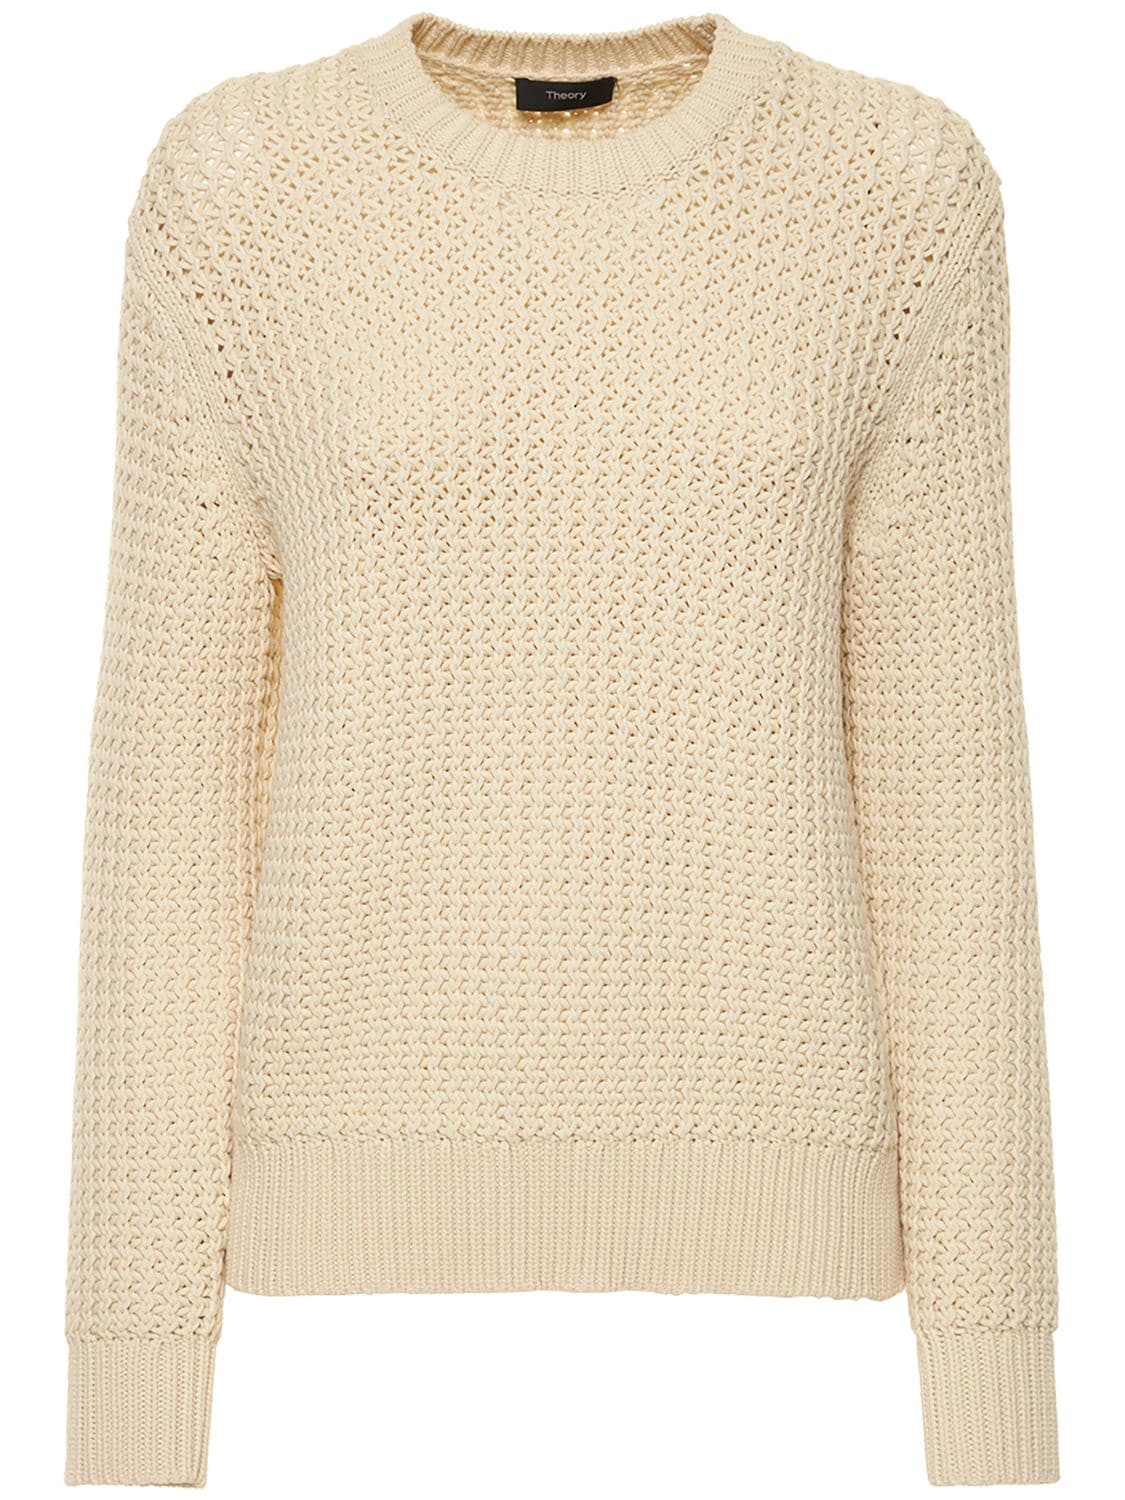 Theory Rickrack Ribbed Cotton Blend Sweater In Beige